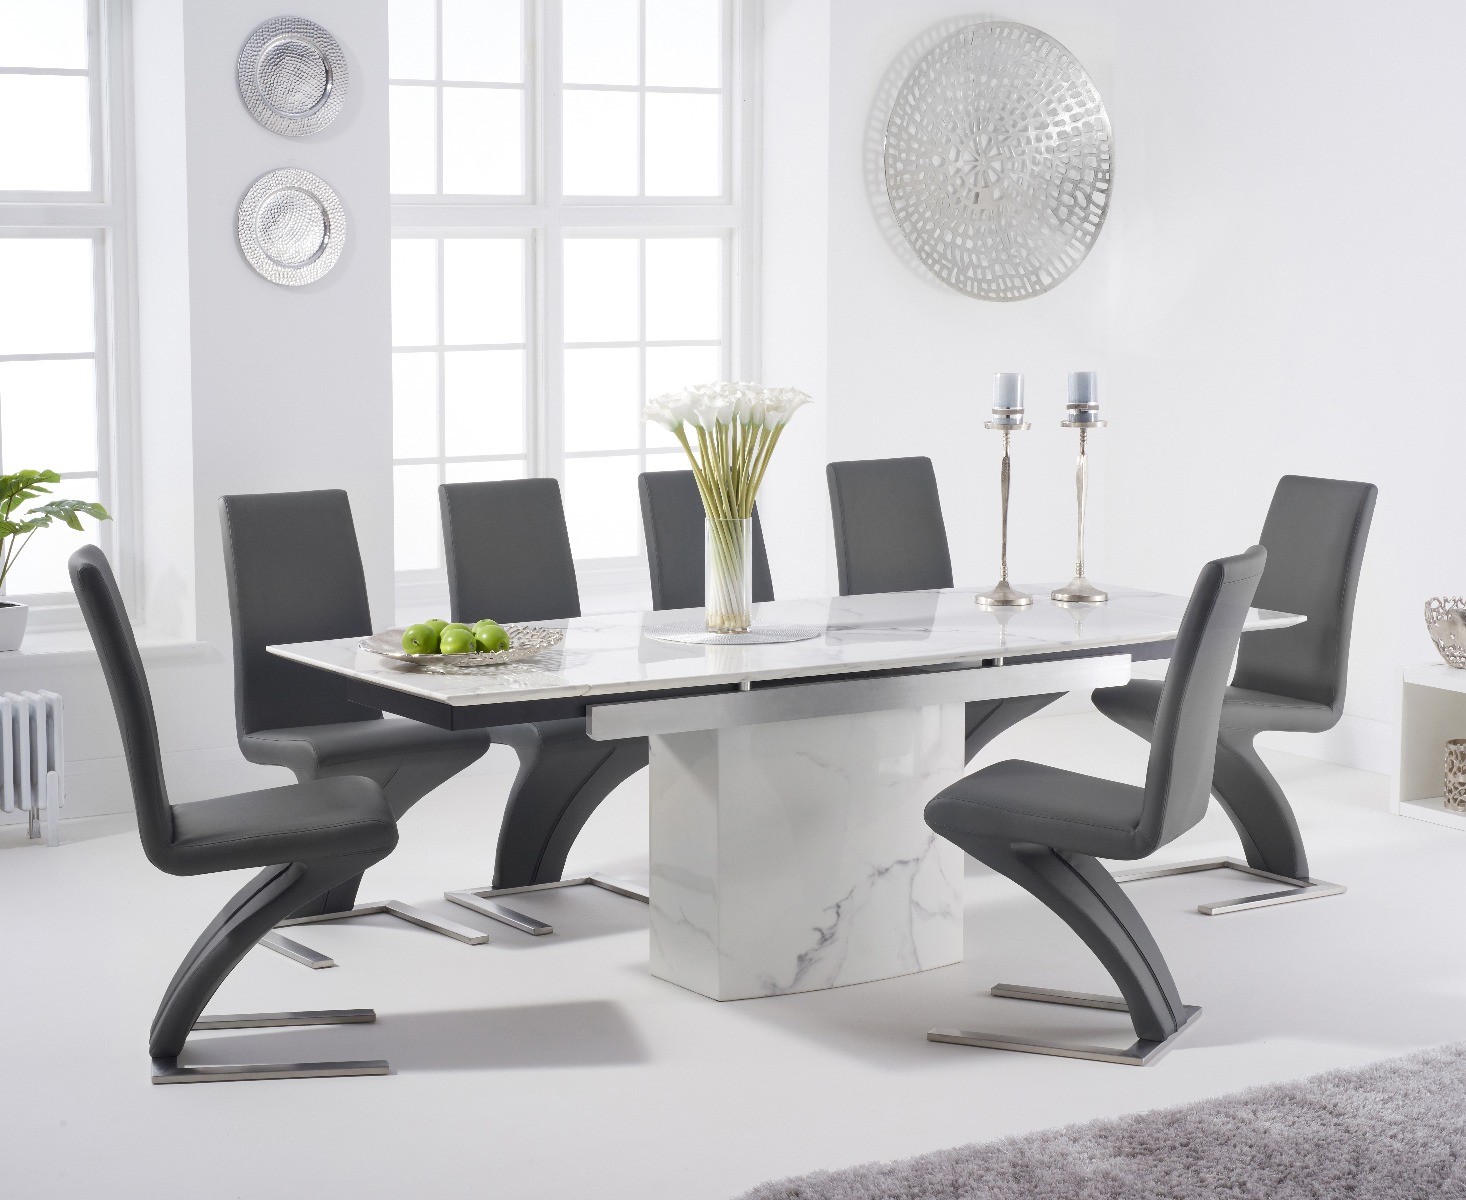 Photo 2 of Extending savona 160cm white marble dining table with 6 grey aldo chairs